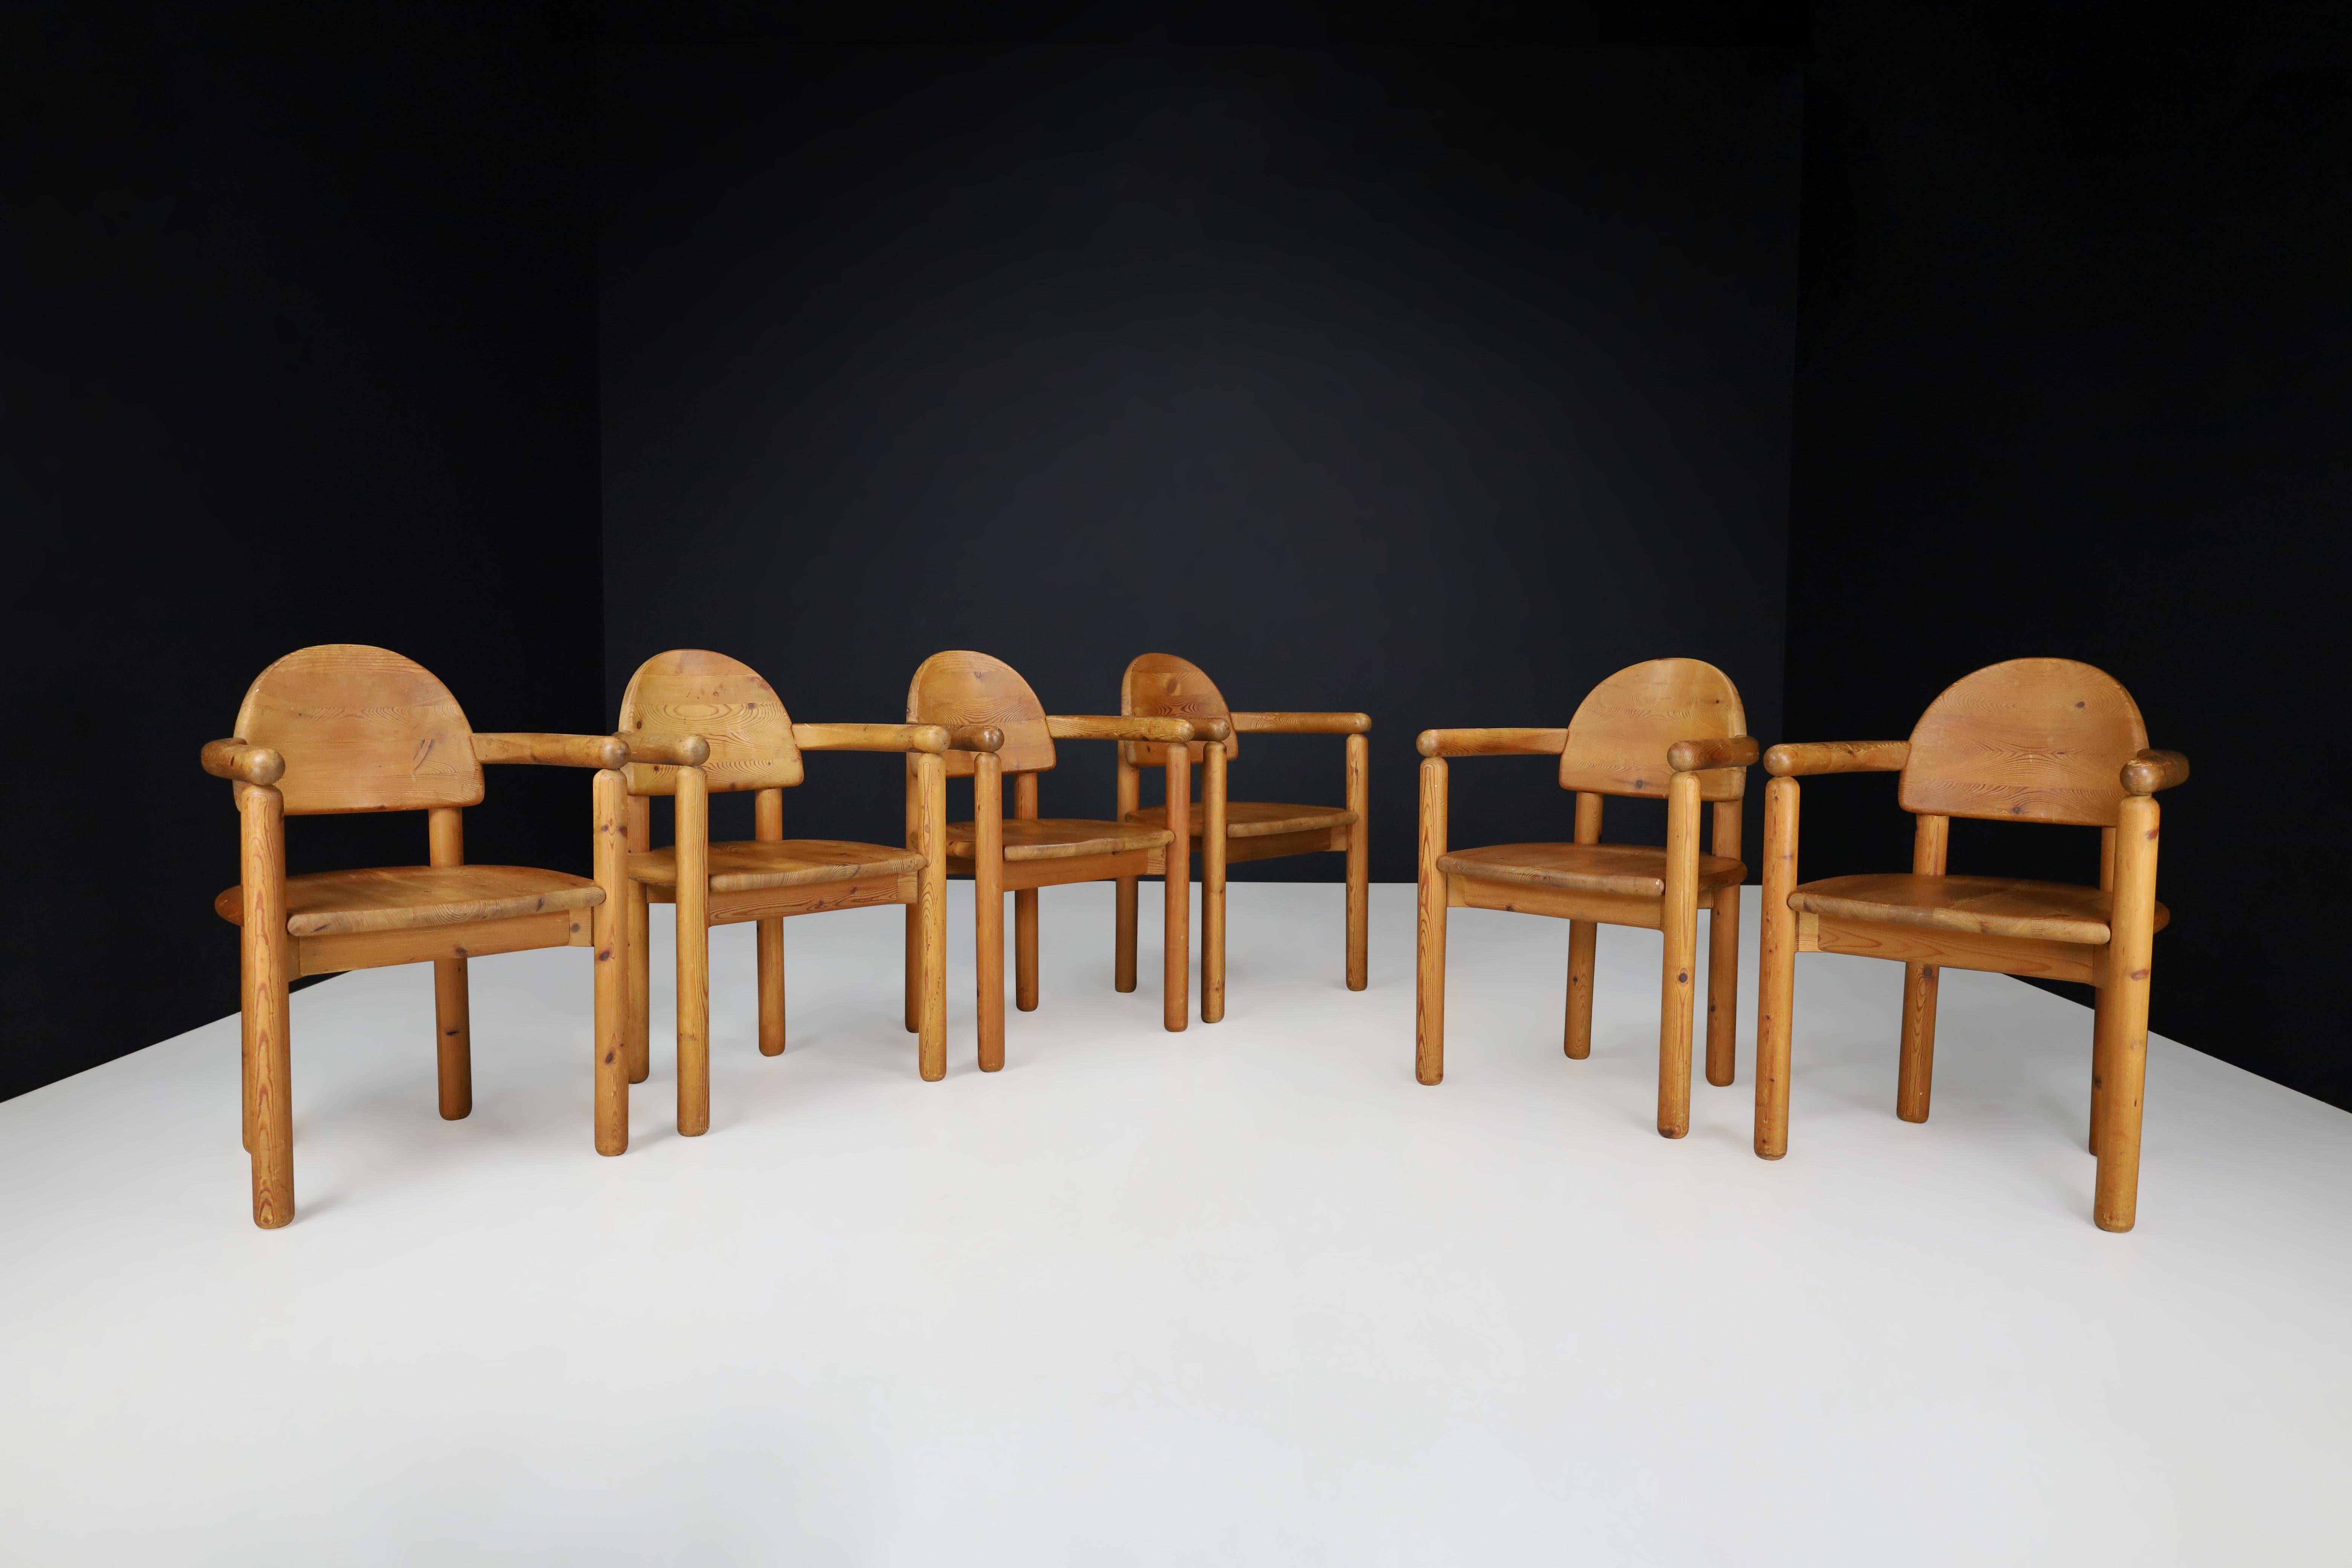 Rainer Daumiller set of six dining room chairs in solid pine, 1970s Denmark.

This set of six dining chairs was created by Rainer Daumiller for Hirtshals Sawmill in Denmark in the 1970s. Made from solid pine, they boast a simple yet sophisticated